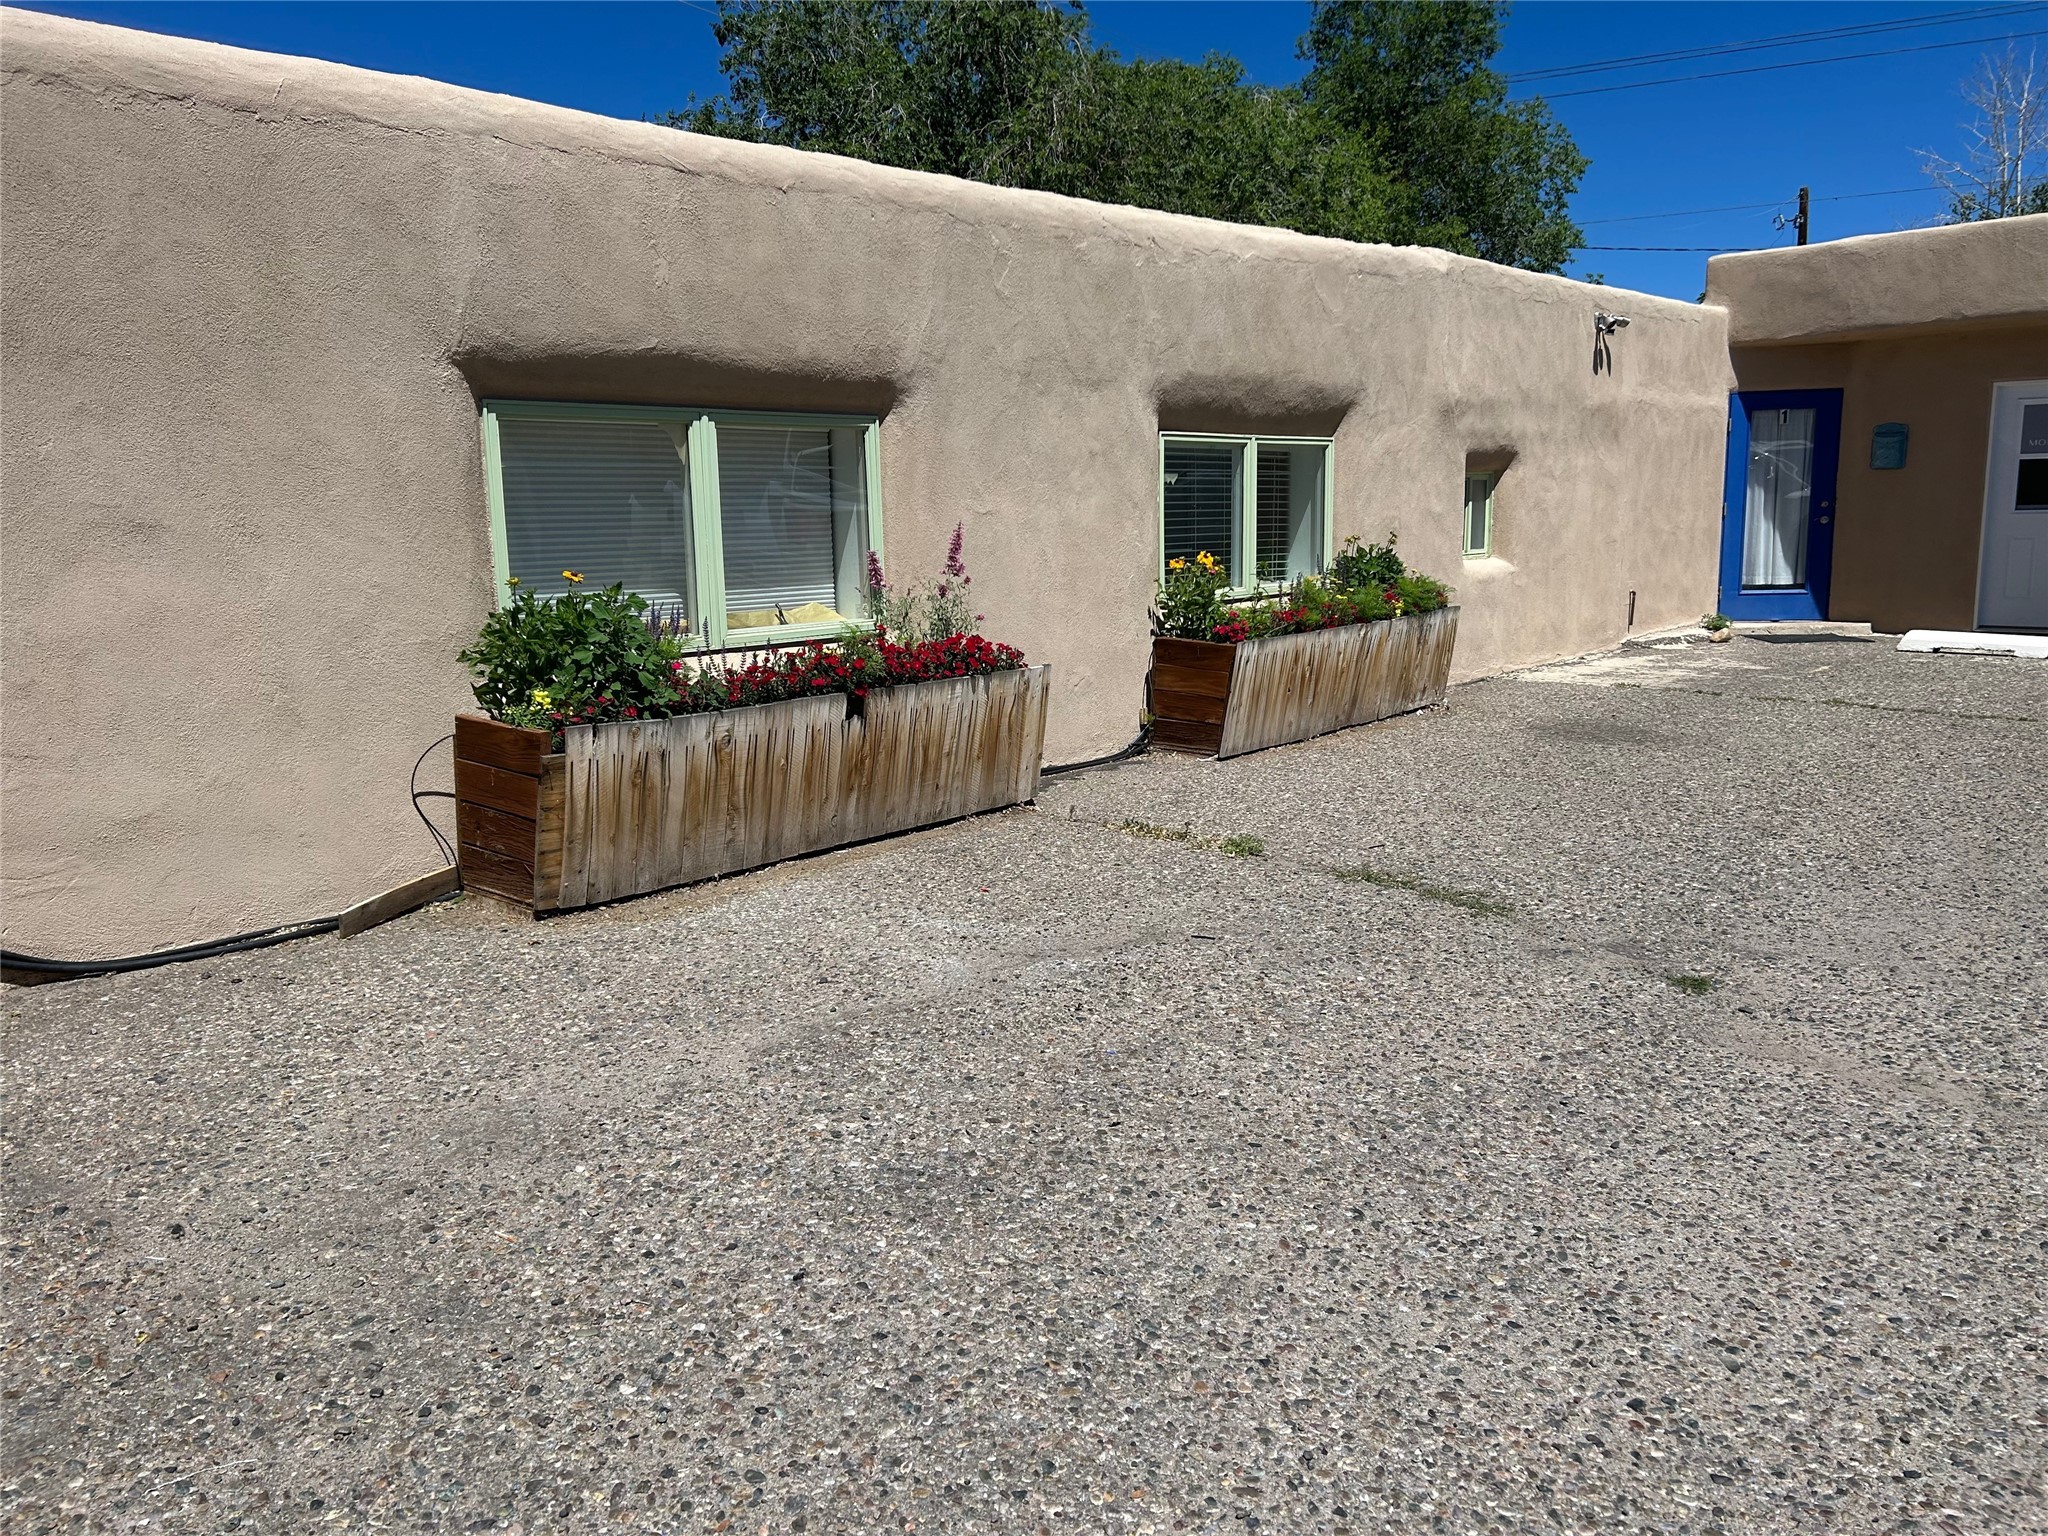 501 Franklin 12, Santa Fe, New Mexico 87501, ,Commercial Lease,For Rent,501 Franklin 12,202341757